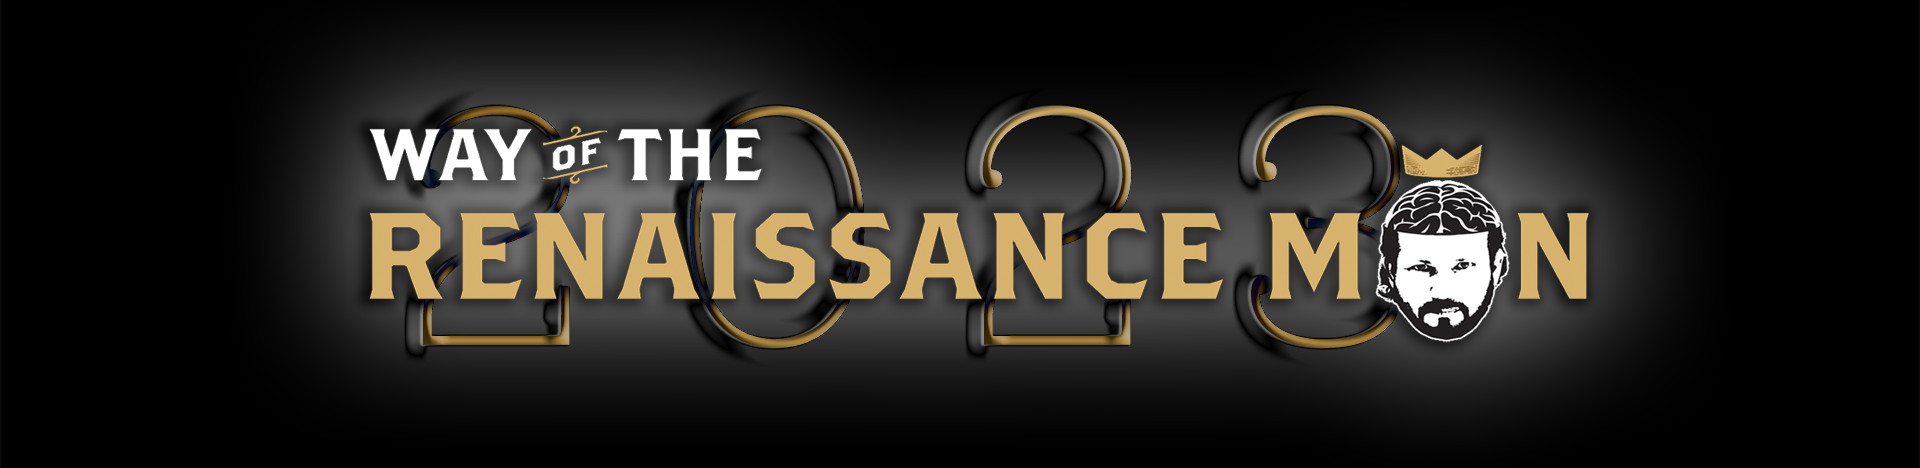 Way Of The Renaissance Man Lifestyle Website and Podcast Starring Jim Woods